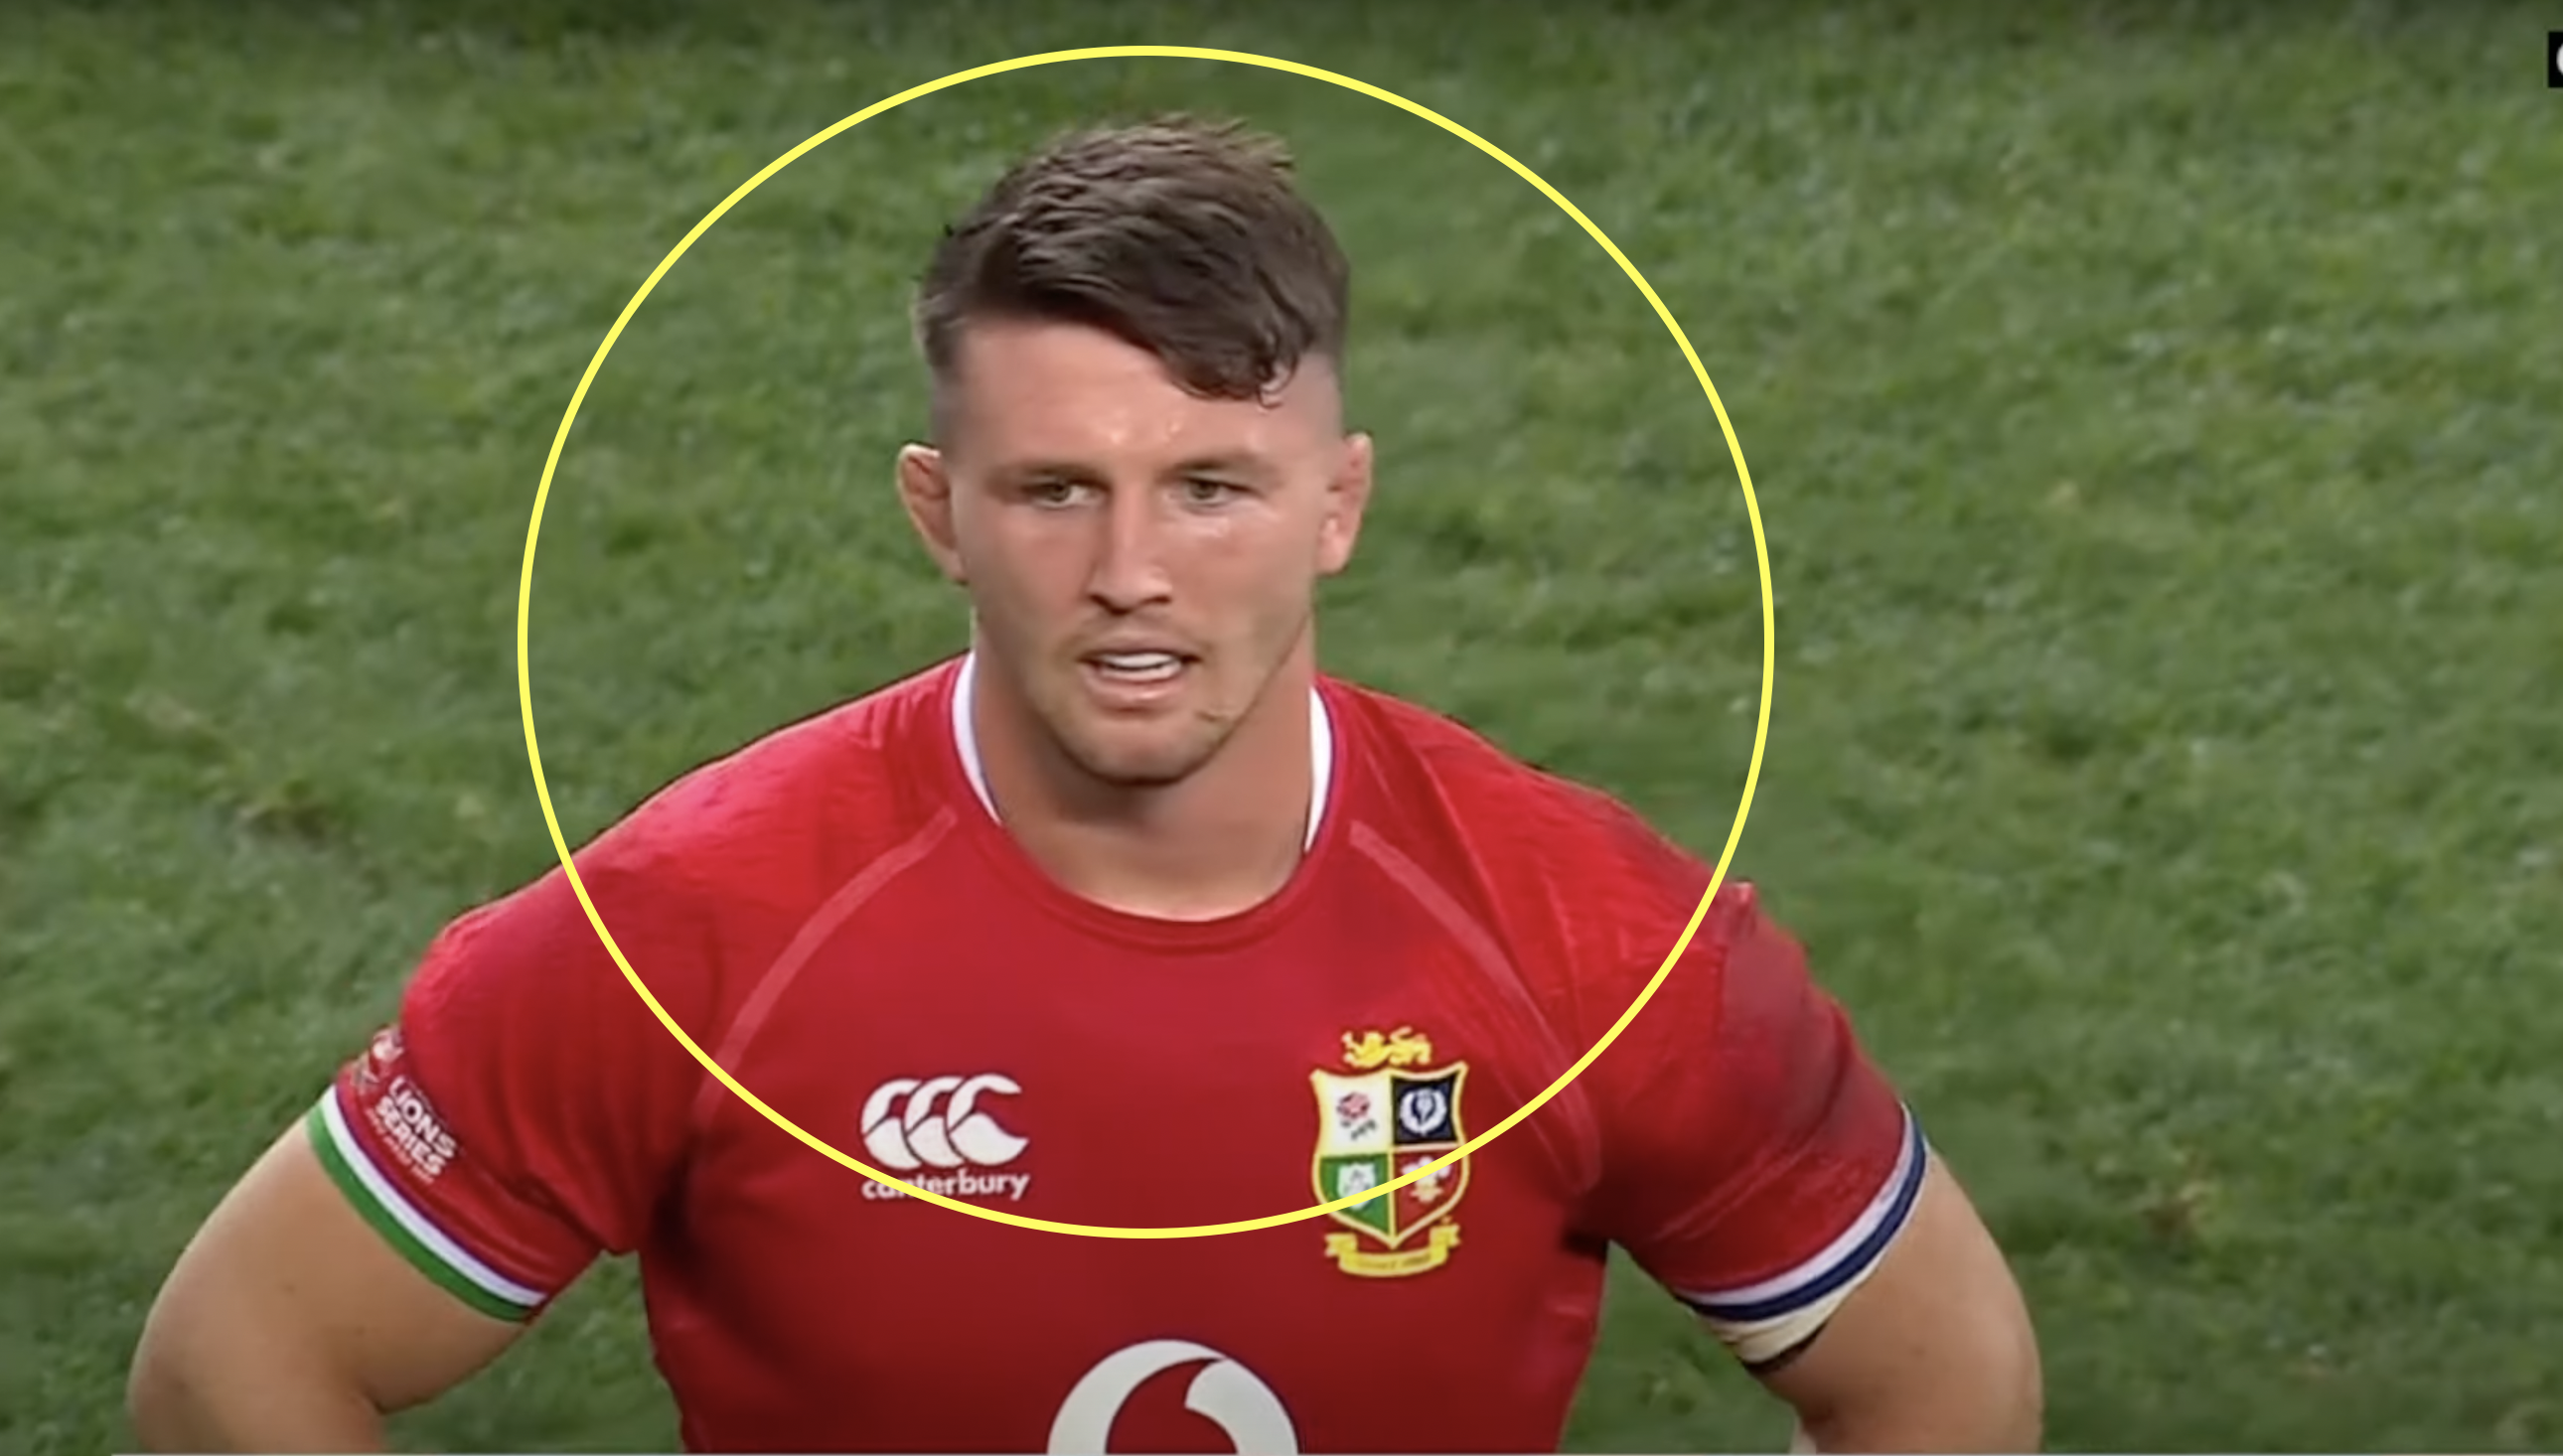 The Lions fine that could have ended an England star's international career